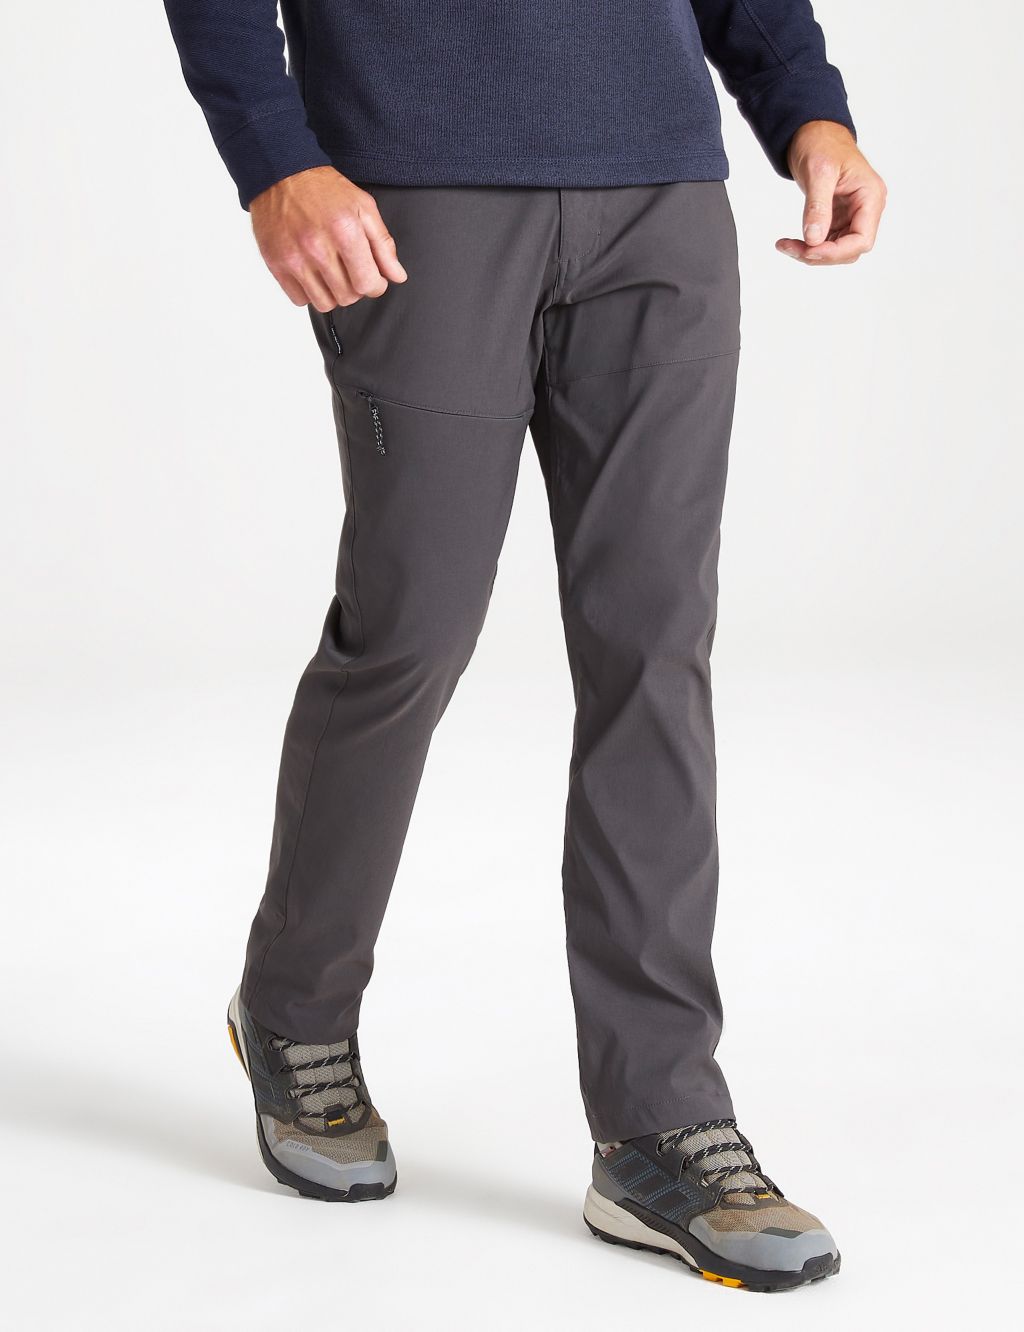 Kiwi Tailored Fit Stretch Trekking Trousers